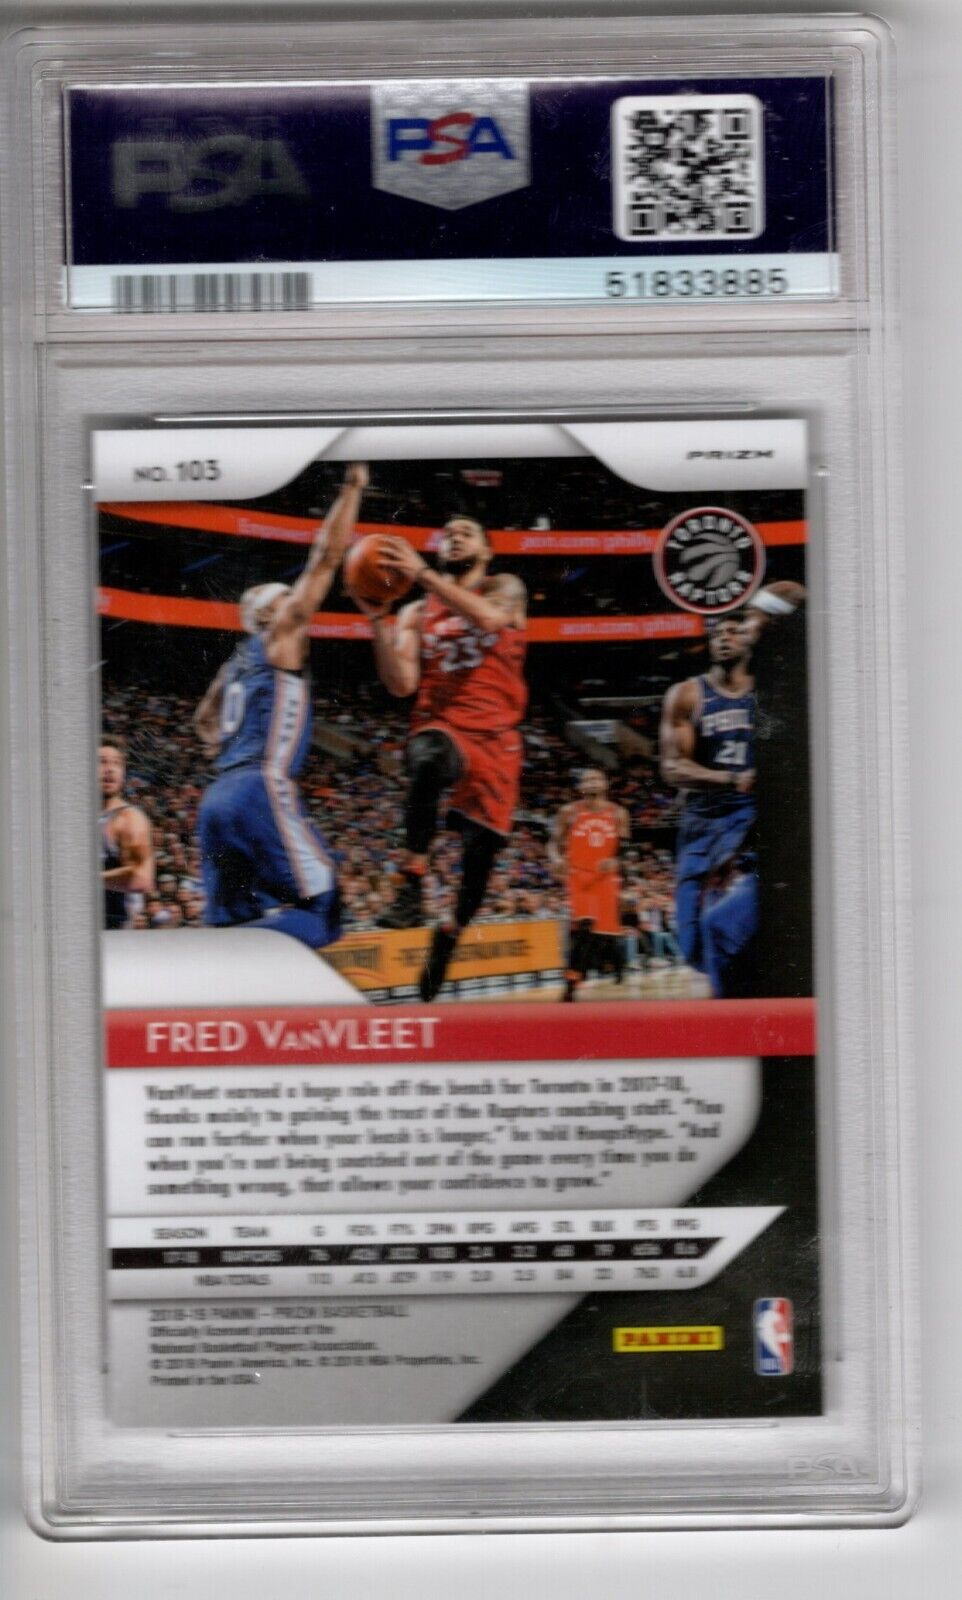 2018/19 Panini Silver Prizm Basketball #103 Fred Van Vleet Rookie Card RC PSA 10 - 643-collectibles